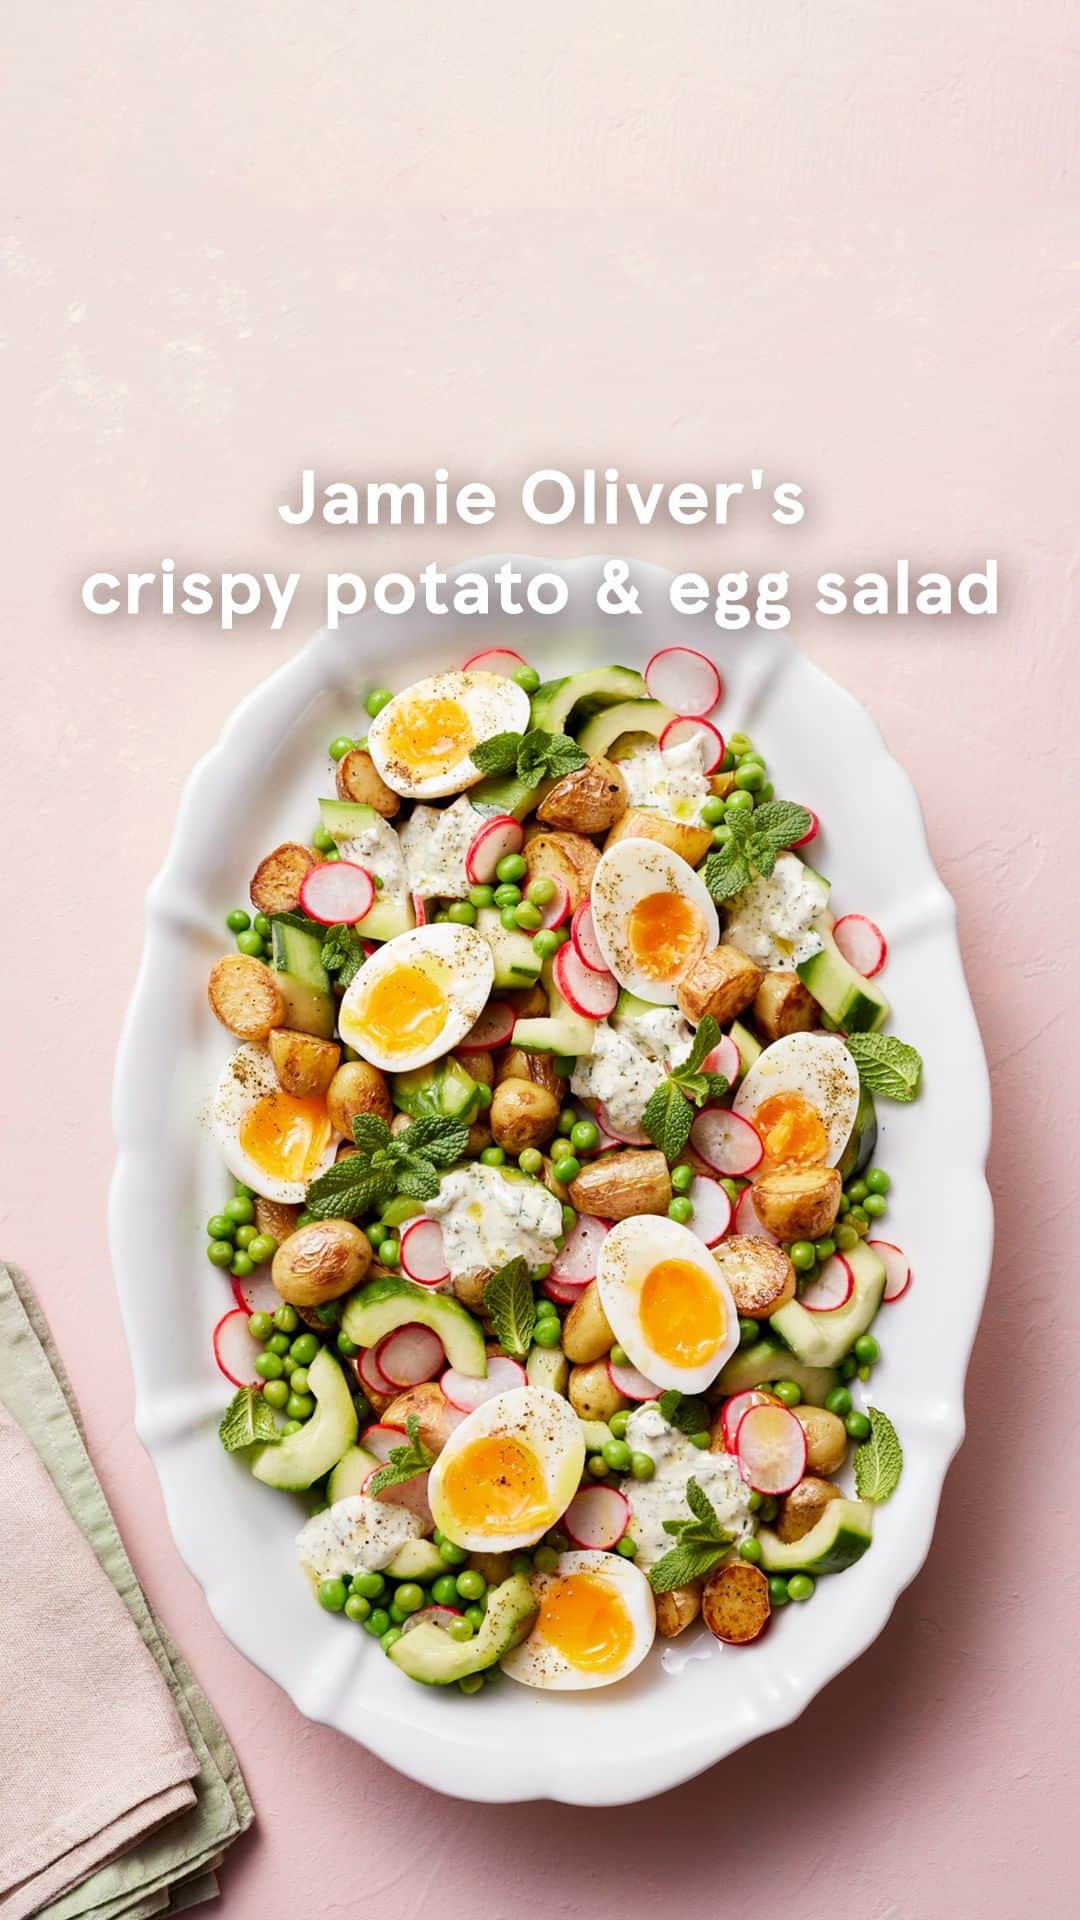 Tesco Food Officialのインスタグラム：「Bring a bit of sunshine to your brunch this weekend with @jamieoliver’s Crispy potato and egg salad recipe. The crisp, golden potatoes are pan-fried, so there’s no need to turn the oven on, then tossed with quick pickled veg, fresh herbs and a creamy dressing – so good! Head to the link in our bio for the recipe. #TescoandJamie #EatMoreVeg」